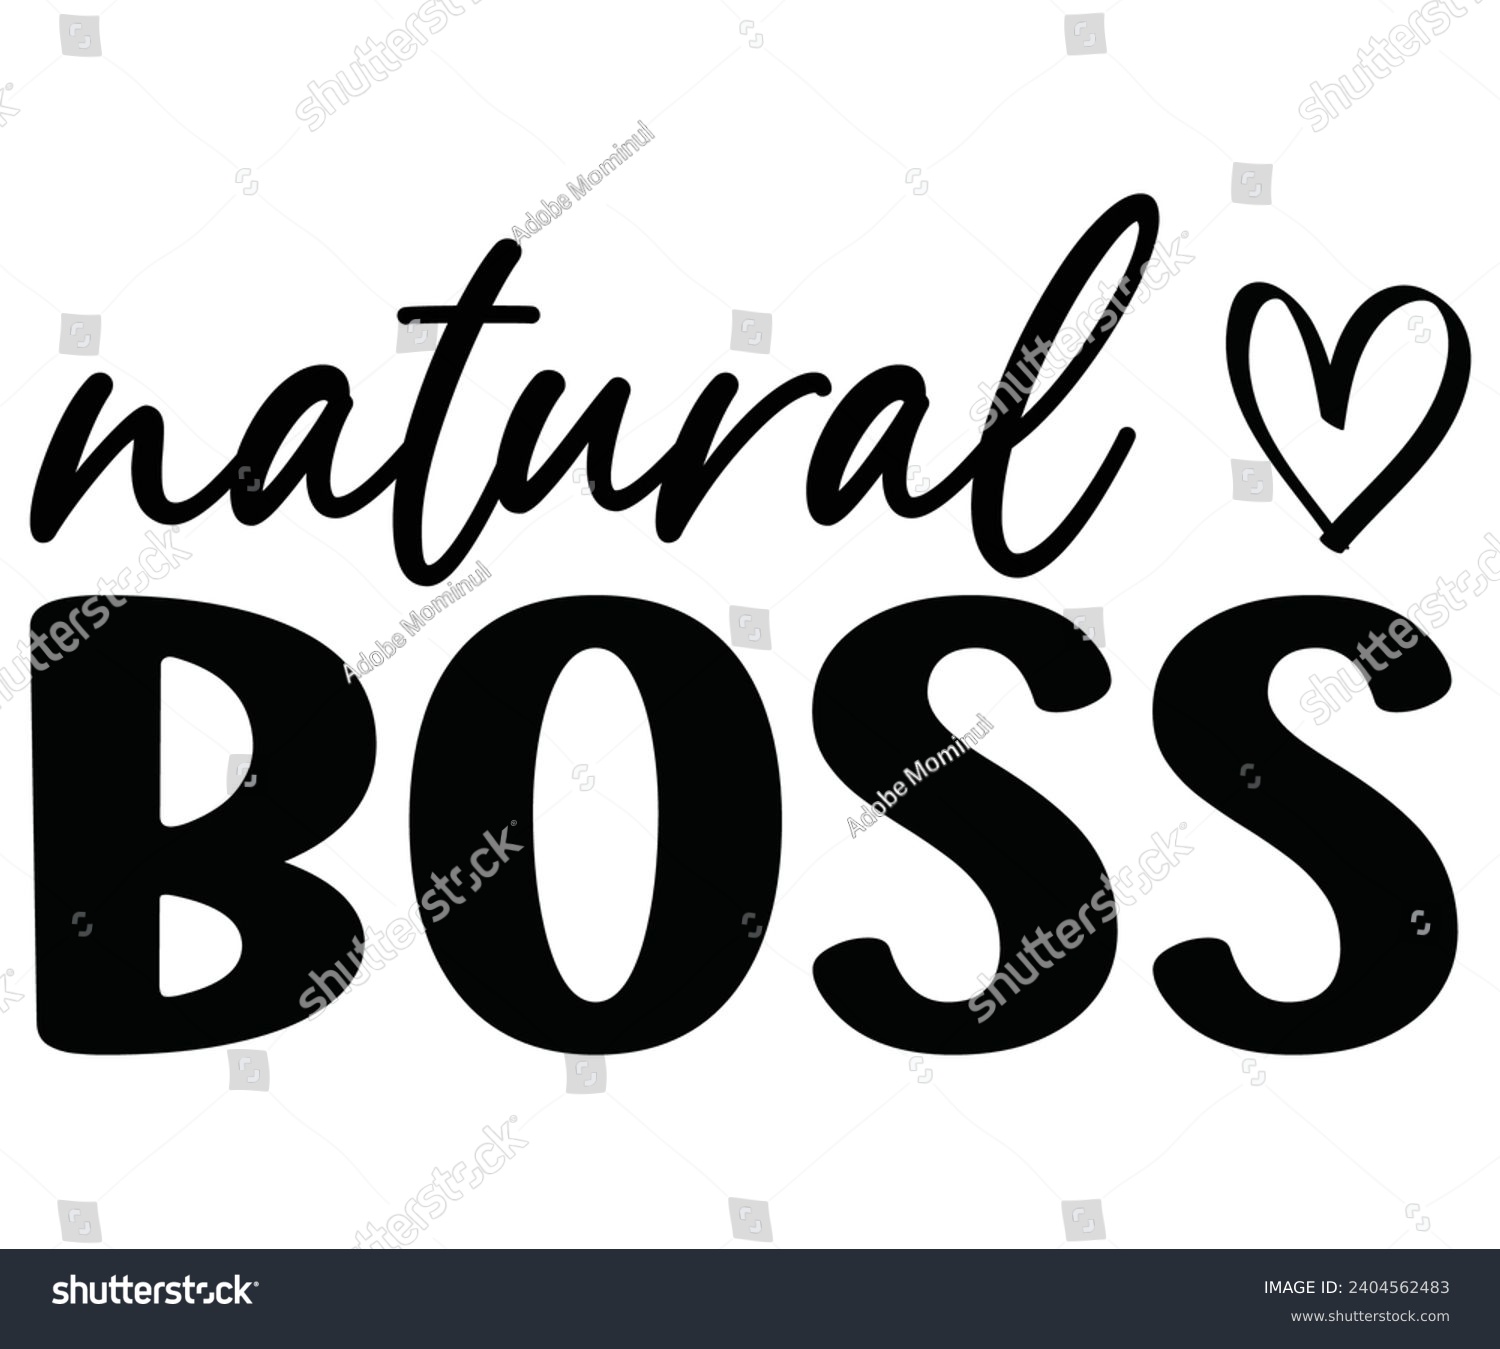 SVG of Natural Boss Svg,Happy Boss Day svg,Boss Saying Quotes,Boss Day T-shirt,Gift for Boss,Great Jobs,Happy Bosses Day t-shirt,Girl Boss Shirt,Motivational Boss,Cut File,Circut And Silhouette,Commercial svg